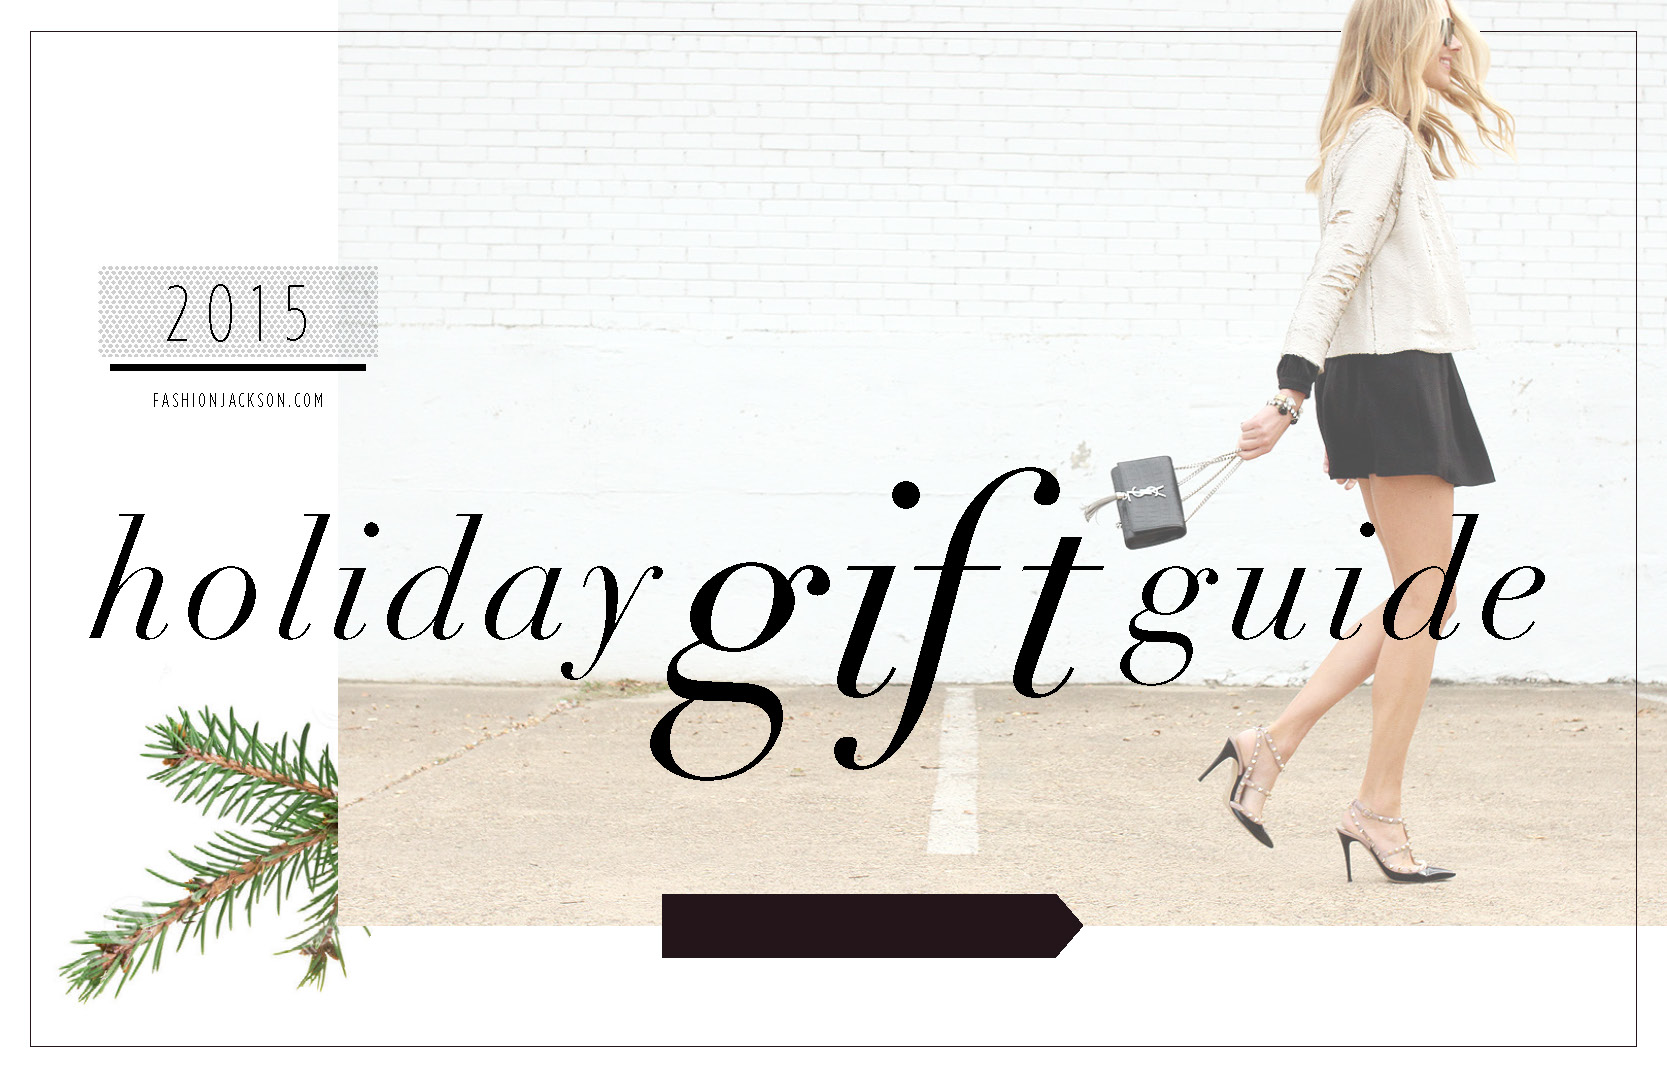 FJ_HOLIDAY_GIFT_GUIDE_3